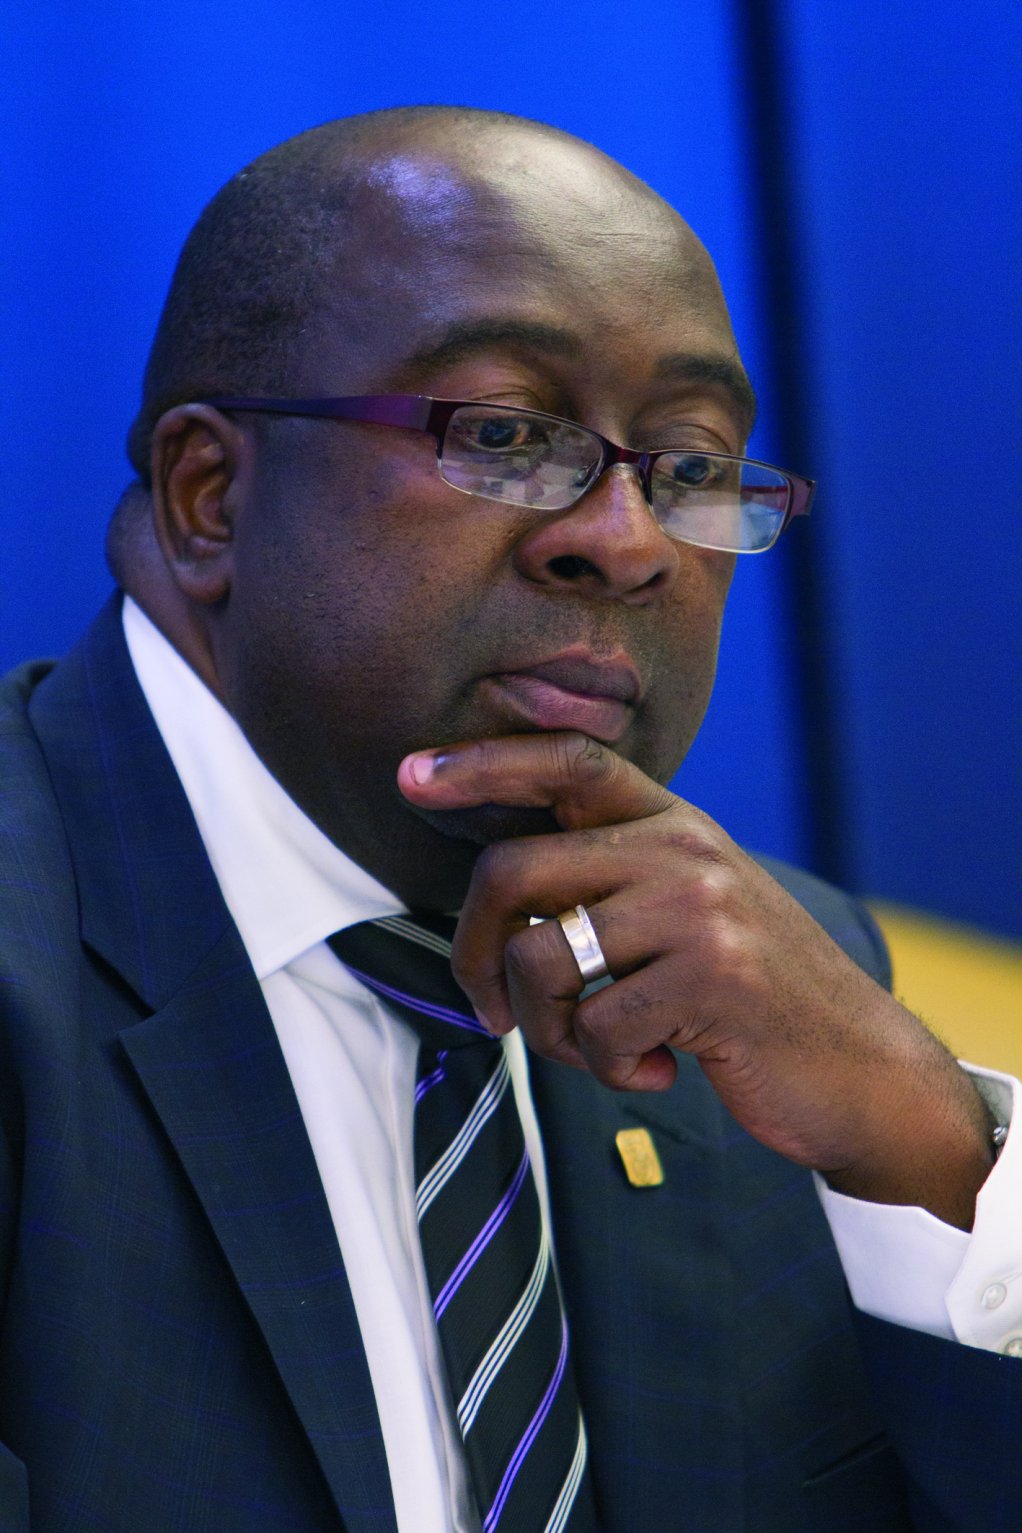 NHLANHLA NENE With a fuel levy increase of more than 80c, the petrol price, which impacts on logistics, is not expected to go down soon